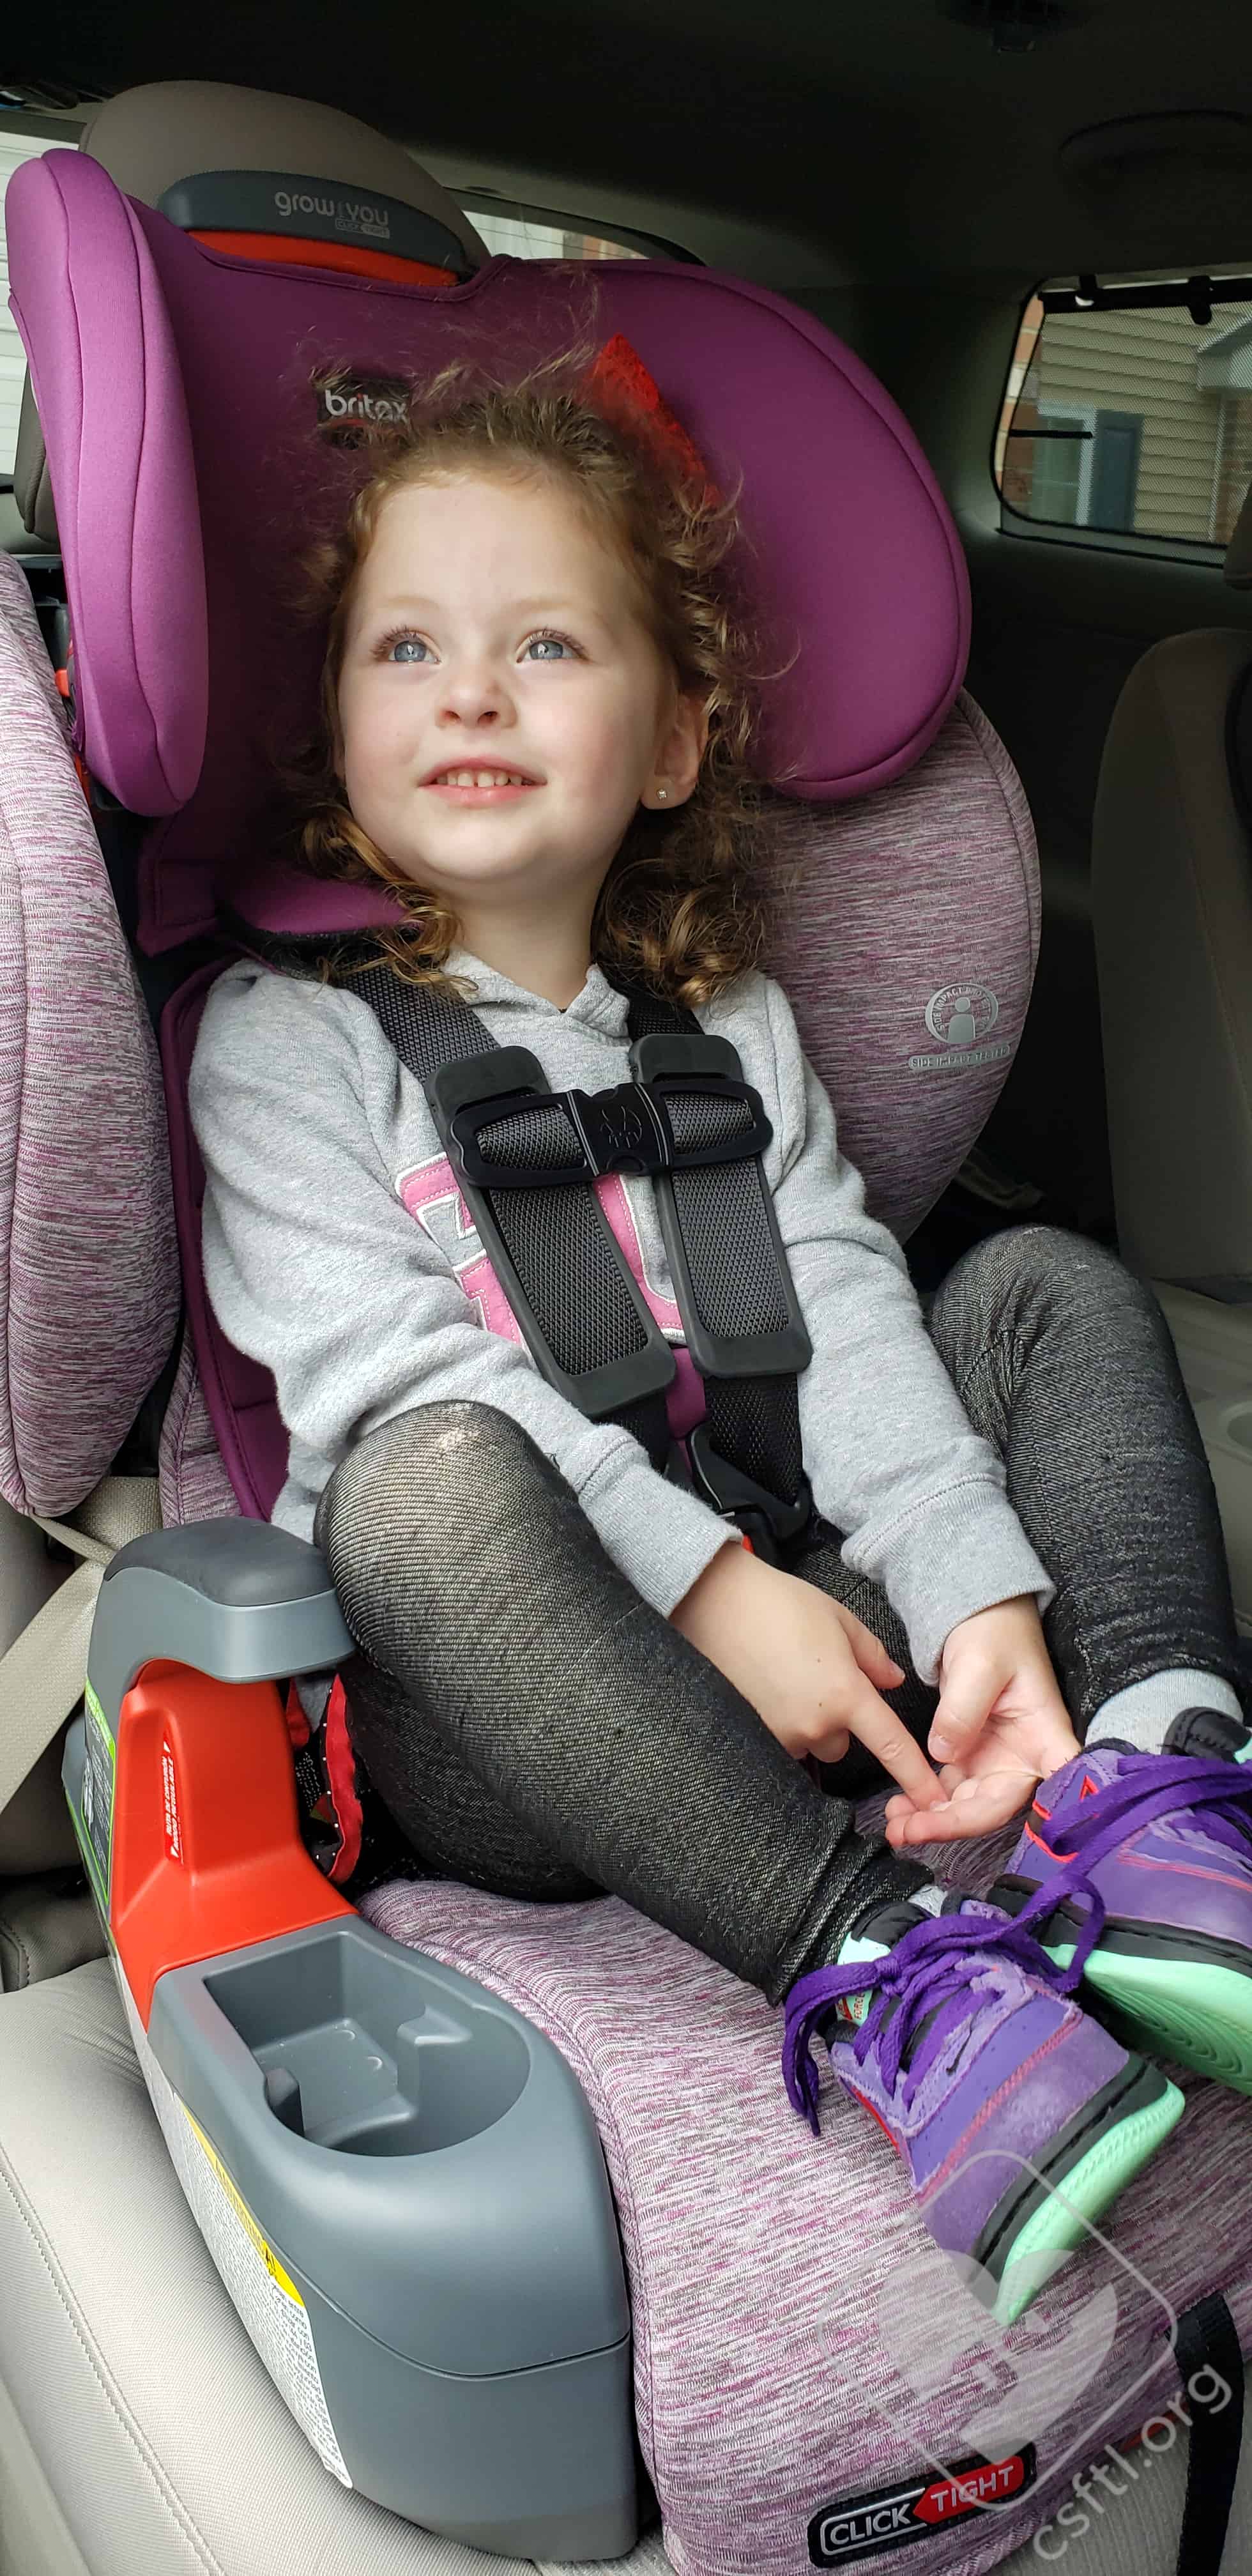 Tight Combination Car Seat Review, Britax Child Car Seat Installation